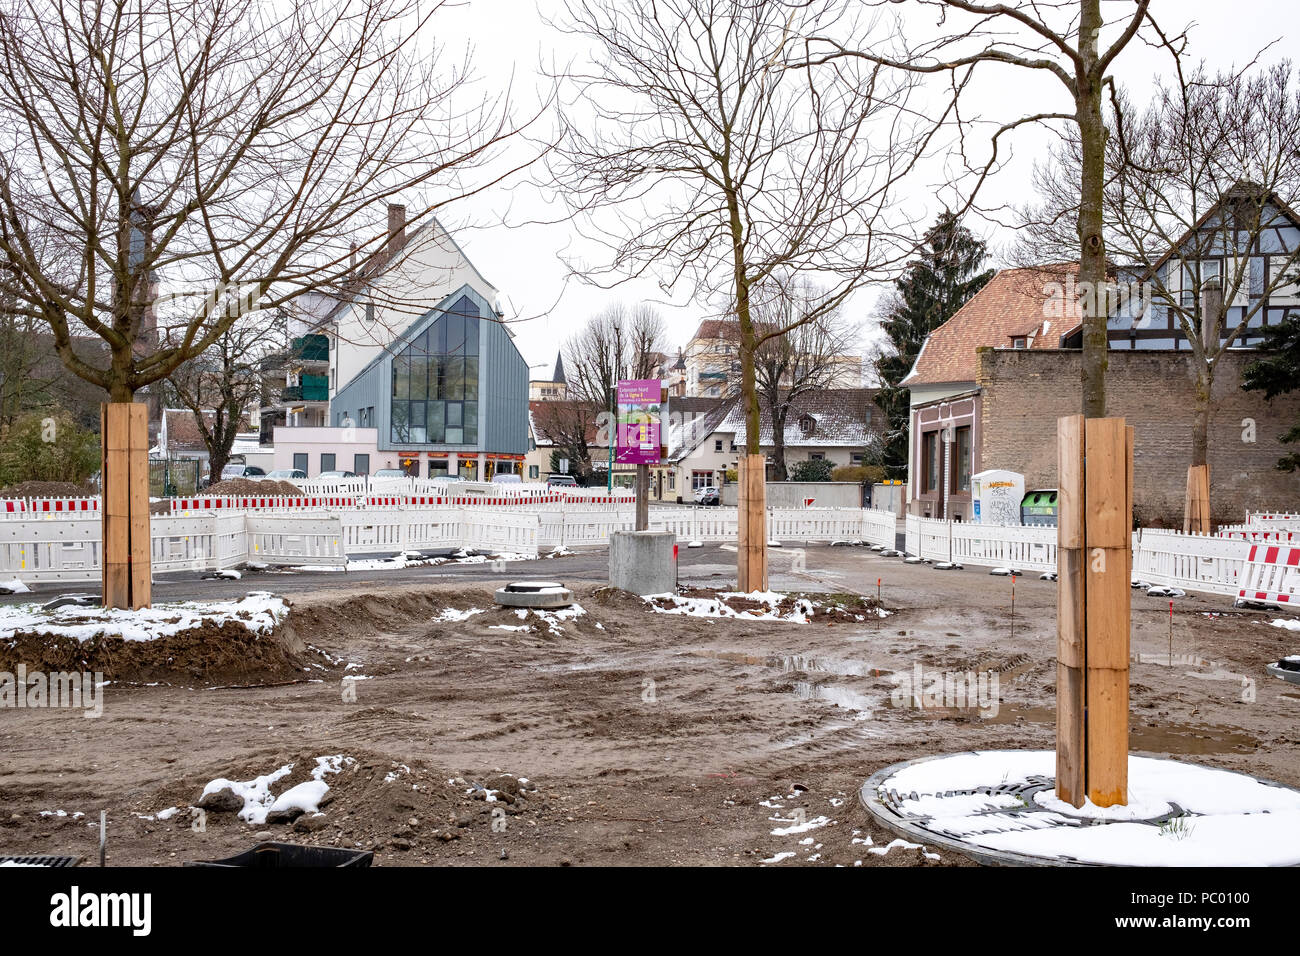 Strasbourg, preliminary tram construction site, line E extension, square, protected trees trunks, plastic barriers, houses, Alsace, France, Europe, Stock Photo